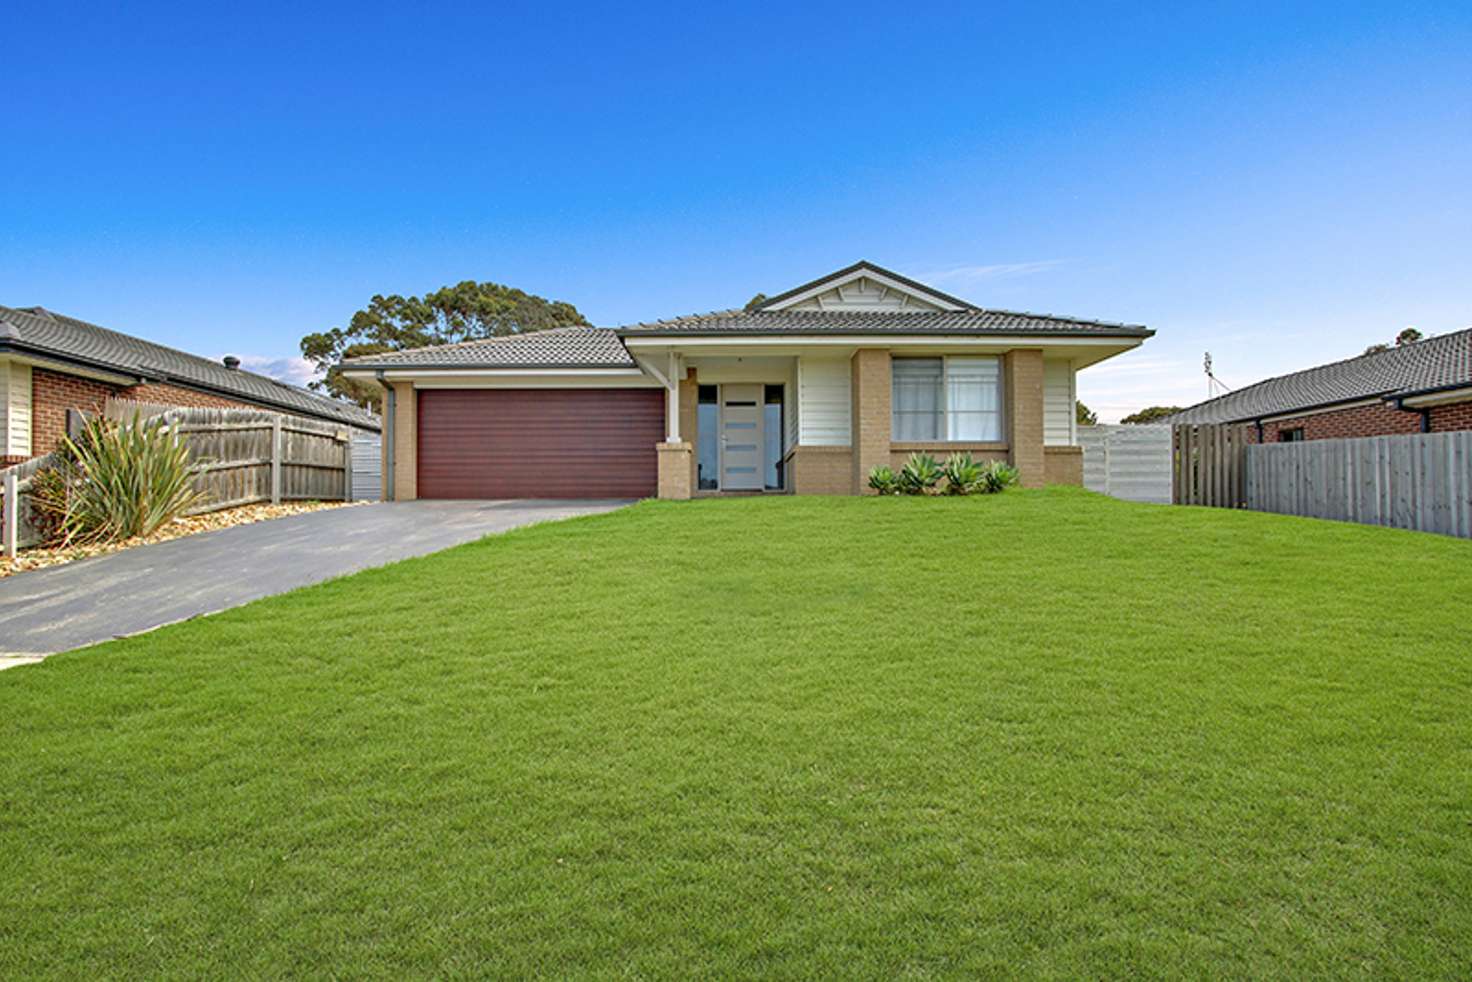 Main view of Homely house listing, 10 DALY STREET, Lake Bunga VIC 3909